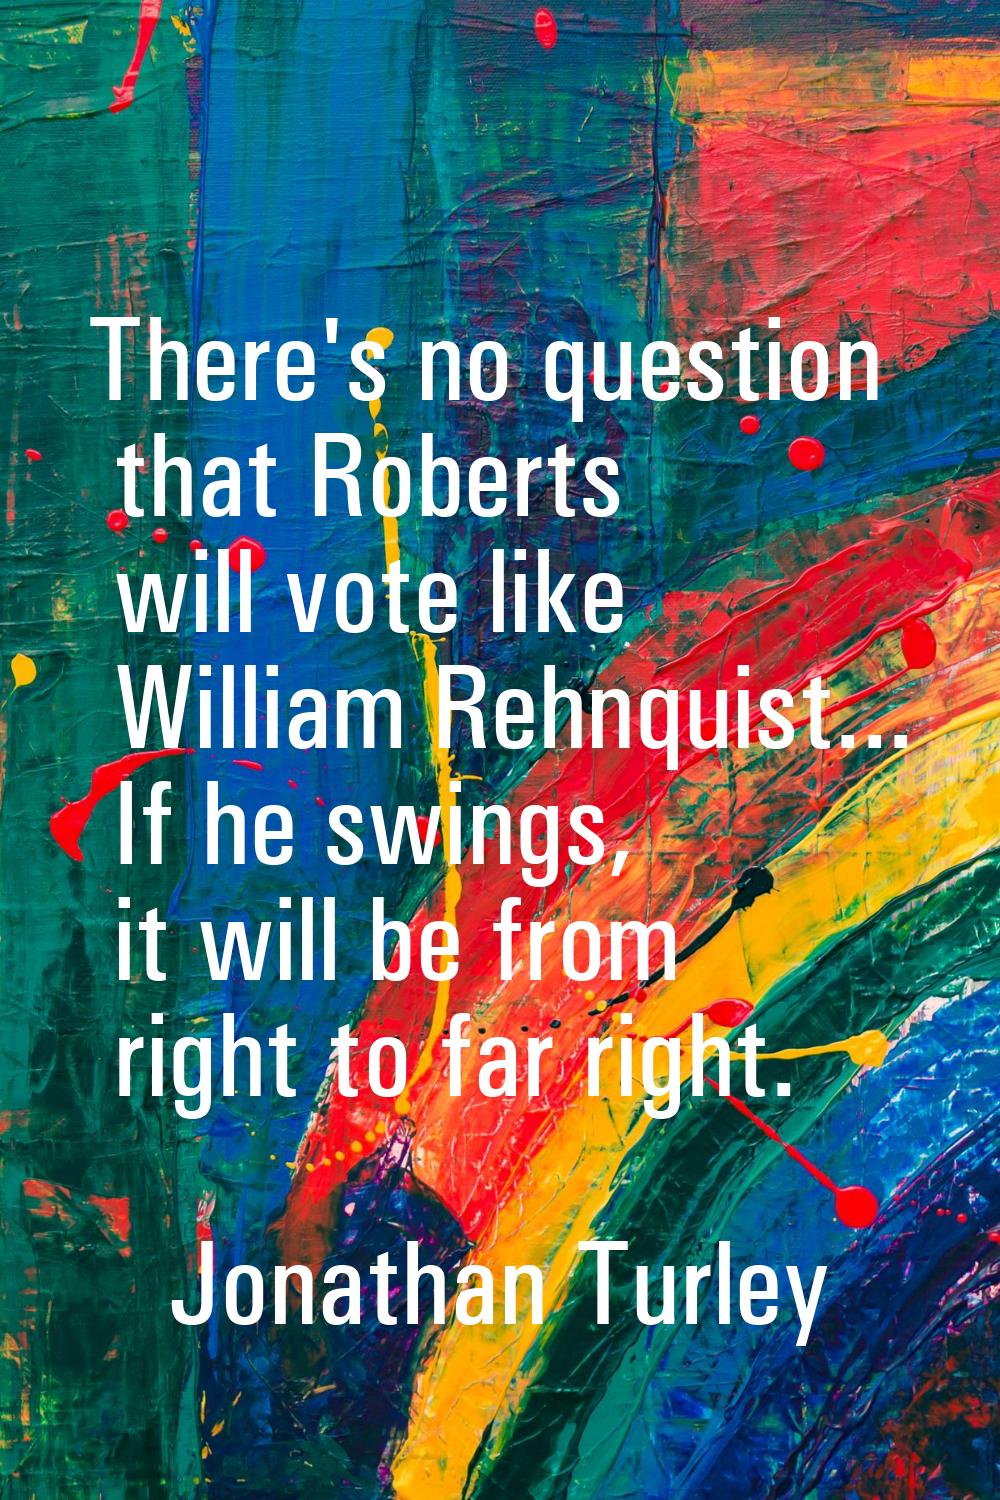 There's no question that Roberts will vote like William Rehnquist... If he swings, it will be from 